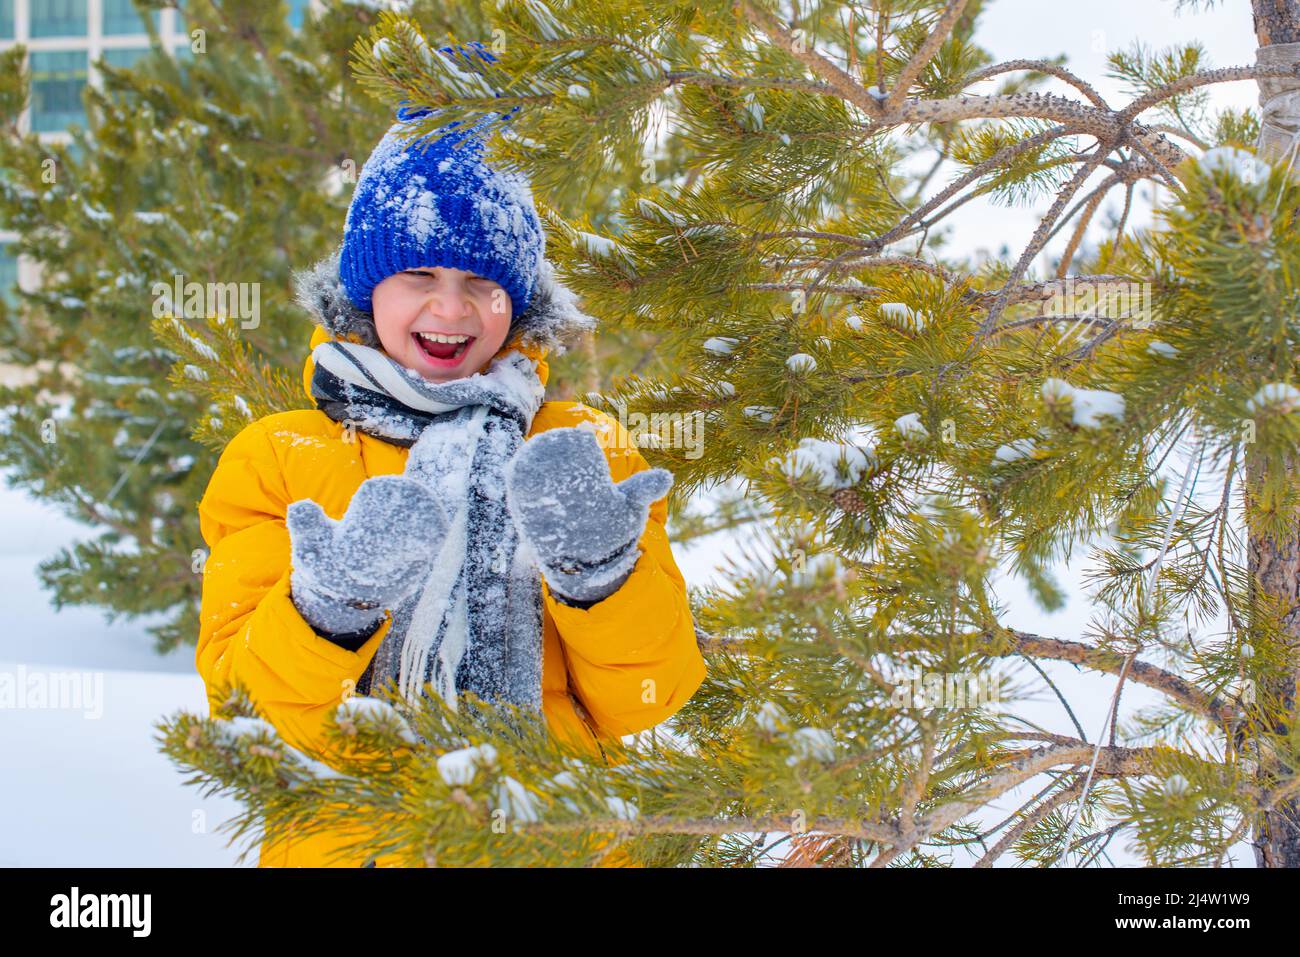 in a blue hat and a yellow jacket a cheerful boy in the snow Stock Photo